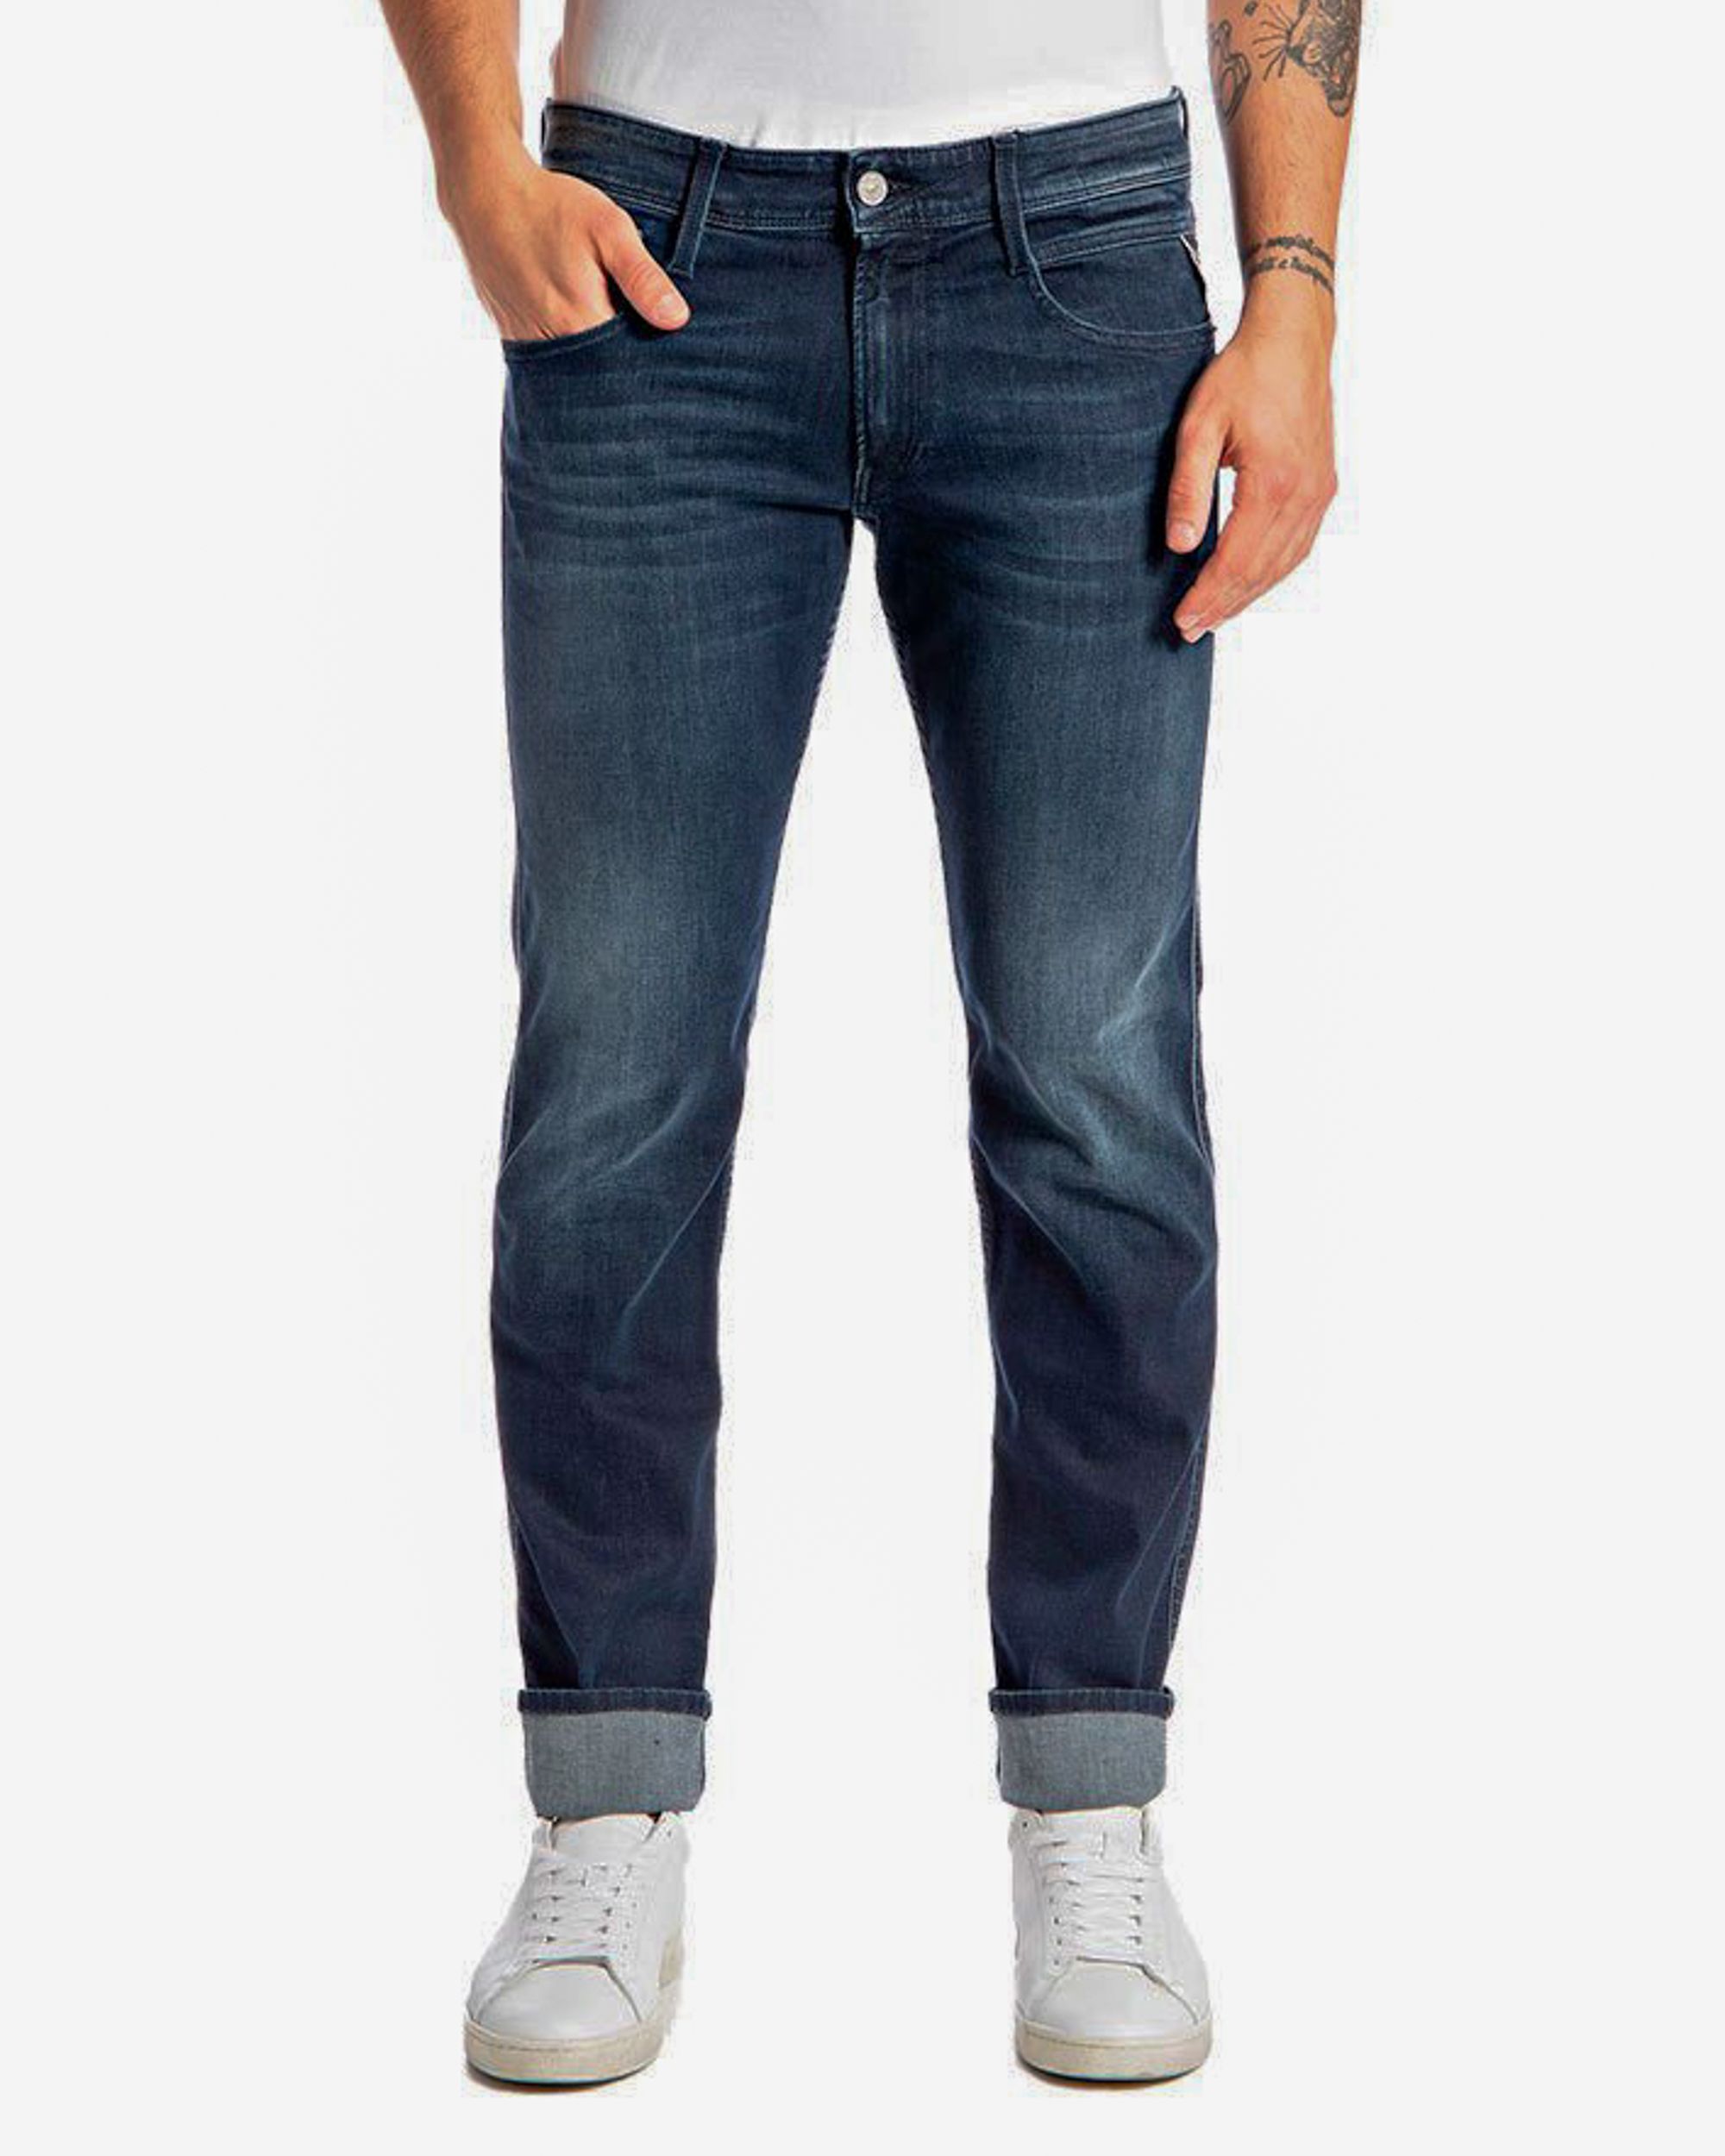 Replay Anbass Powerstretch Jeans Blauw 081772-001-29/32